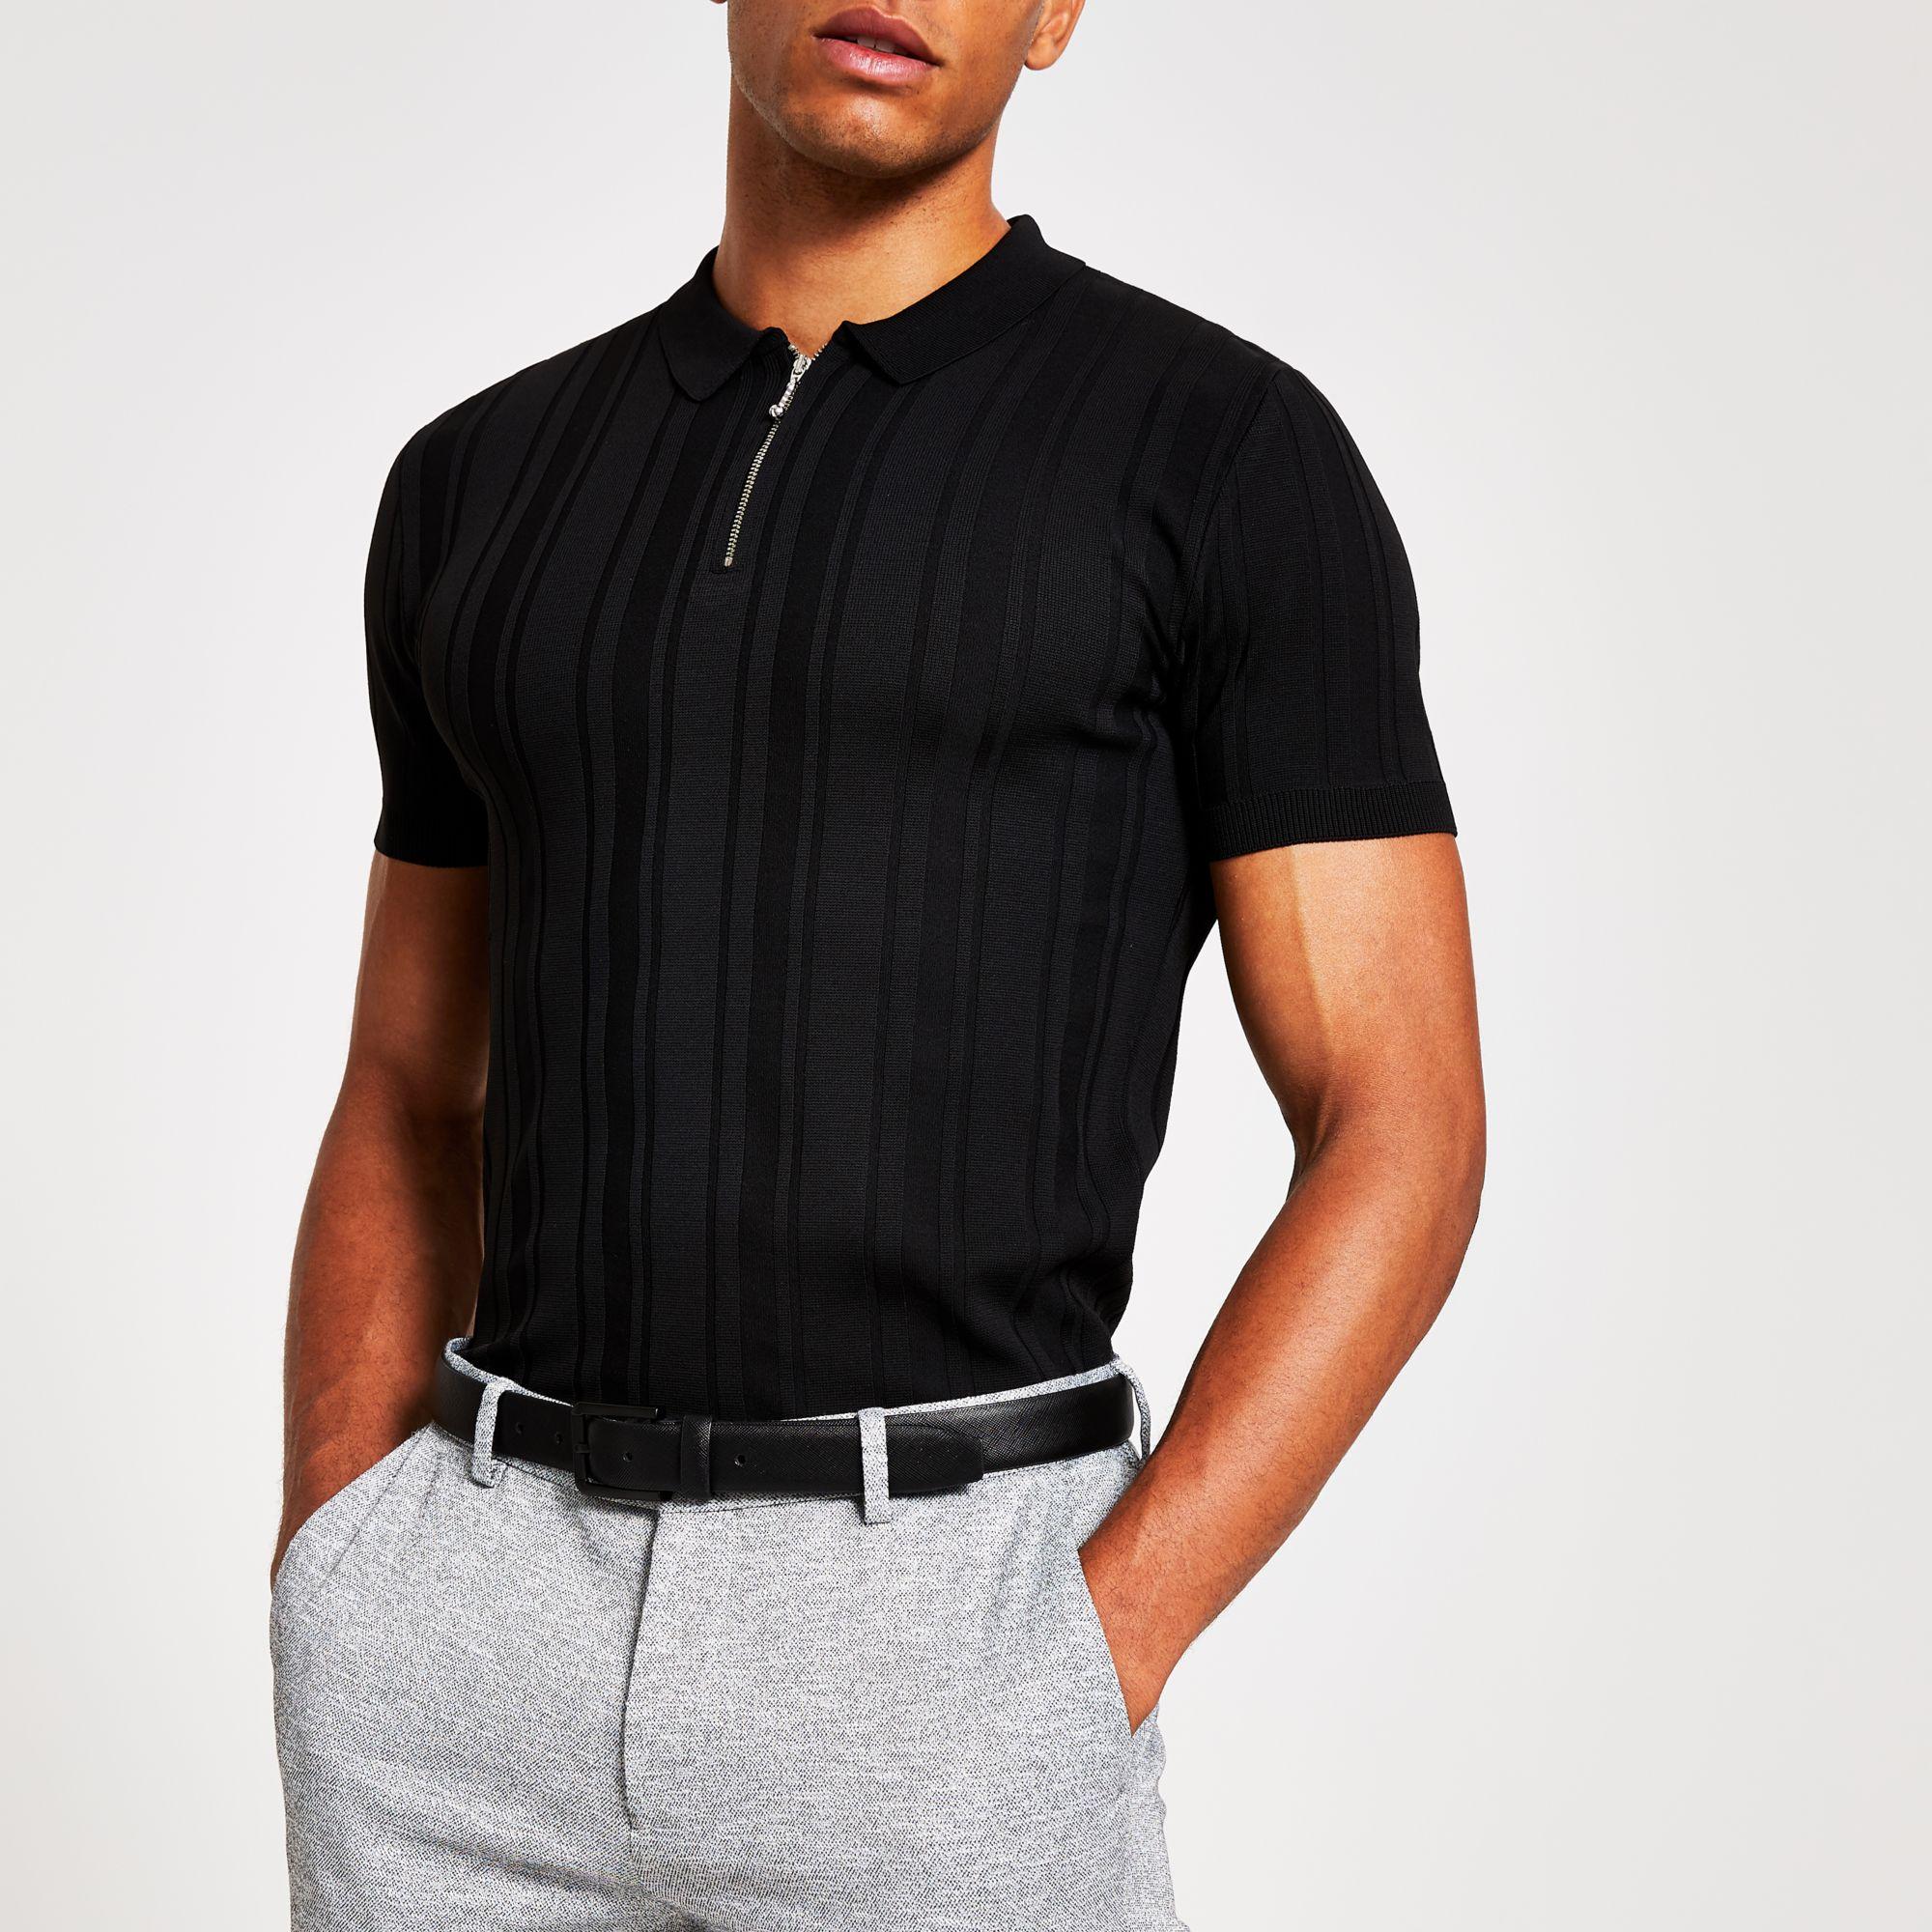 River Island Synthetic Ribbed Knit Muscle Fit Polo Shirt in Black for